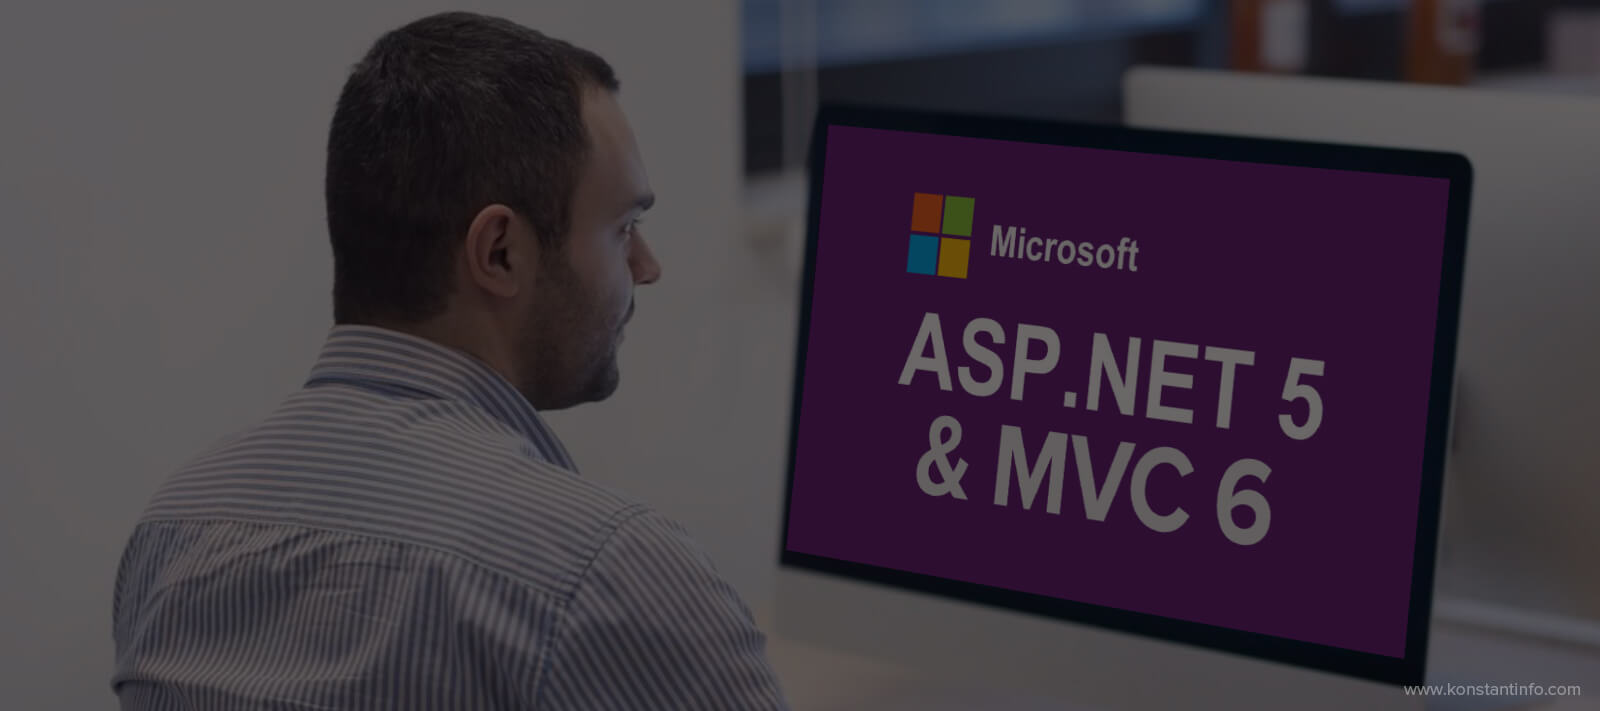 5 Major Changes in ASP.NET 5 and MVC 6